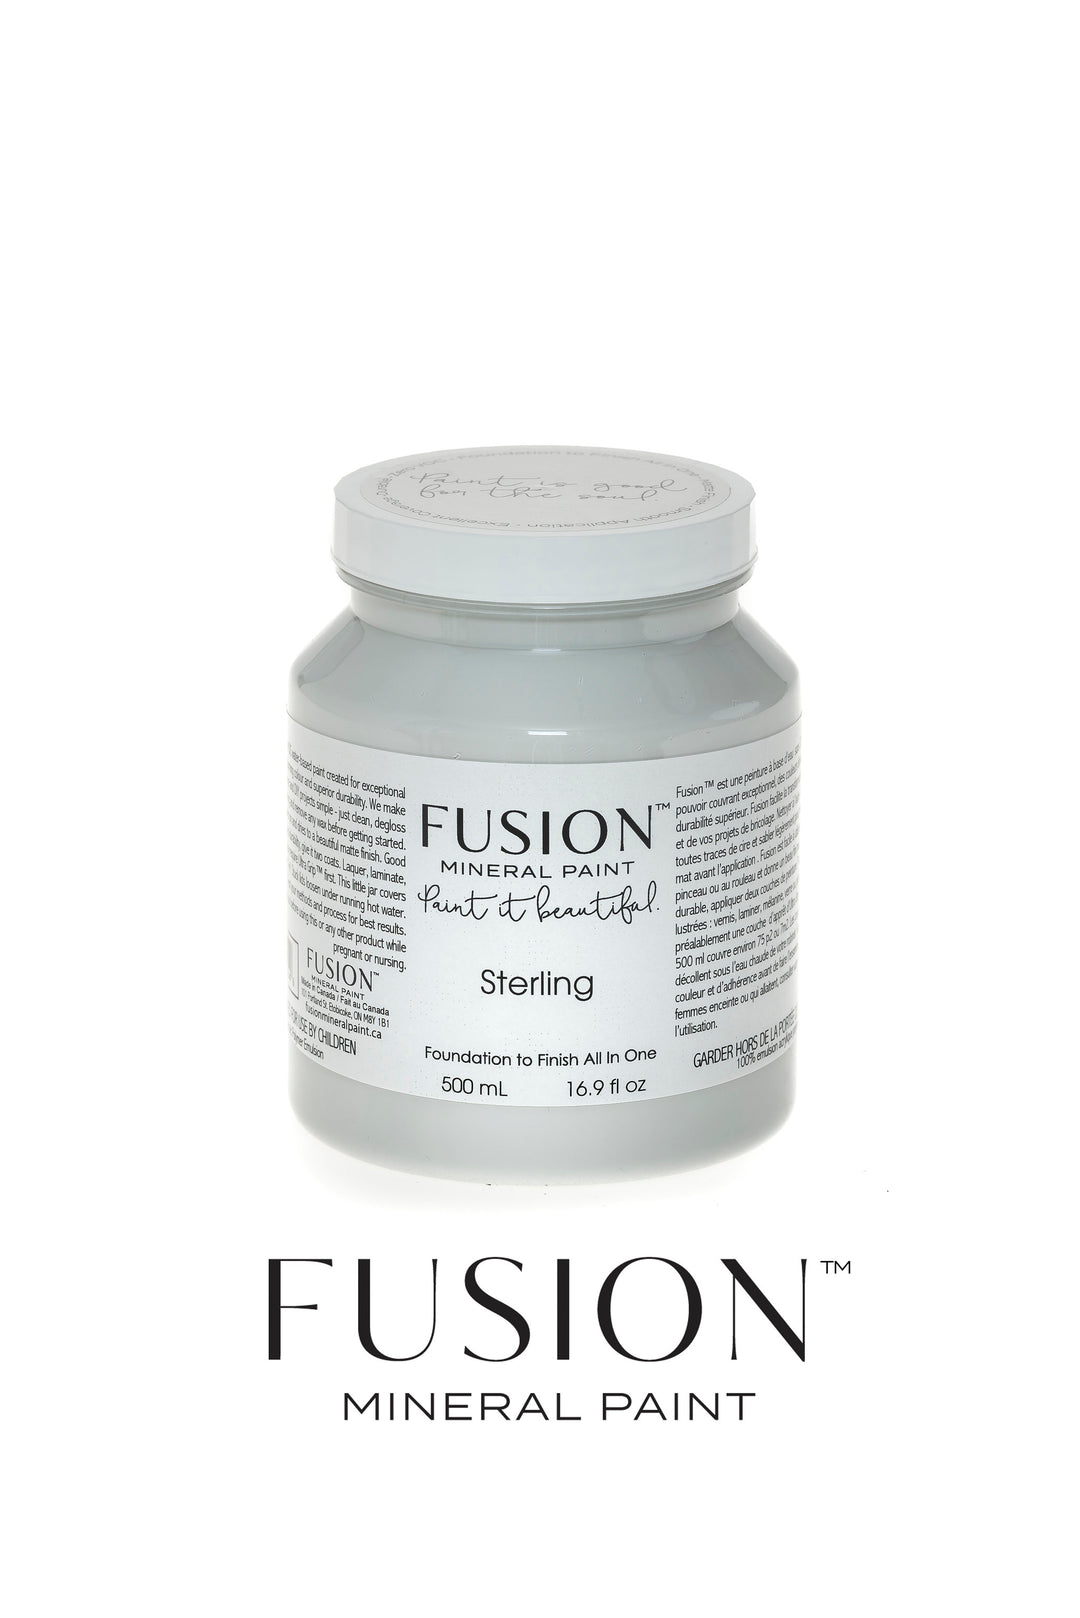 Fusion Mineral Paint-STERLING (Pint) - Acosta's Home